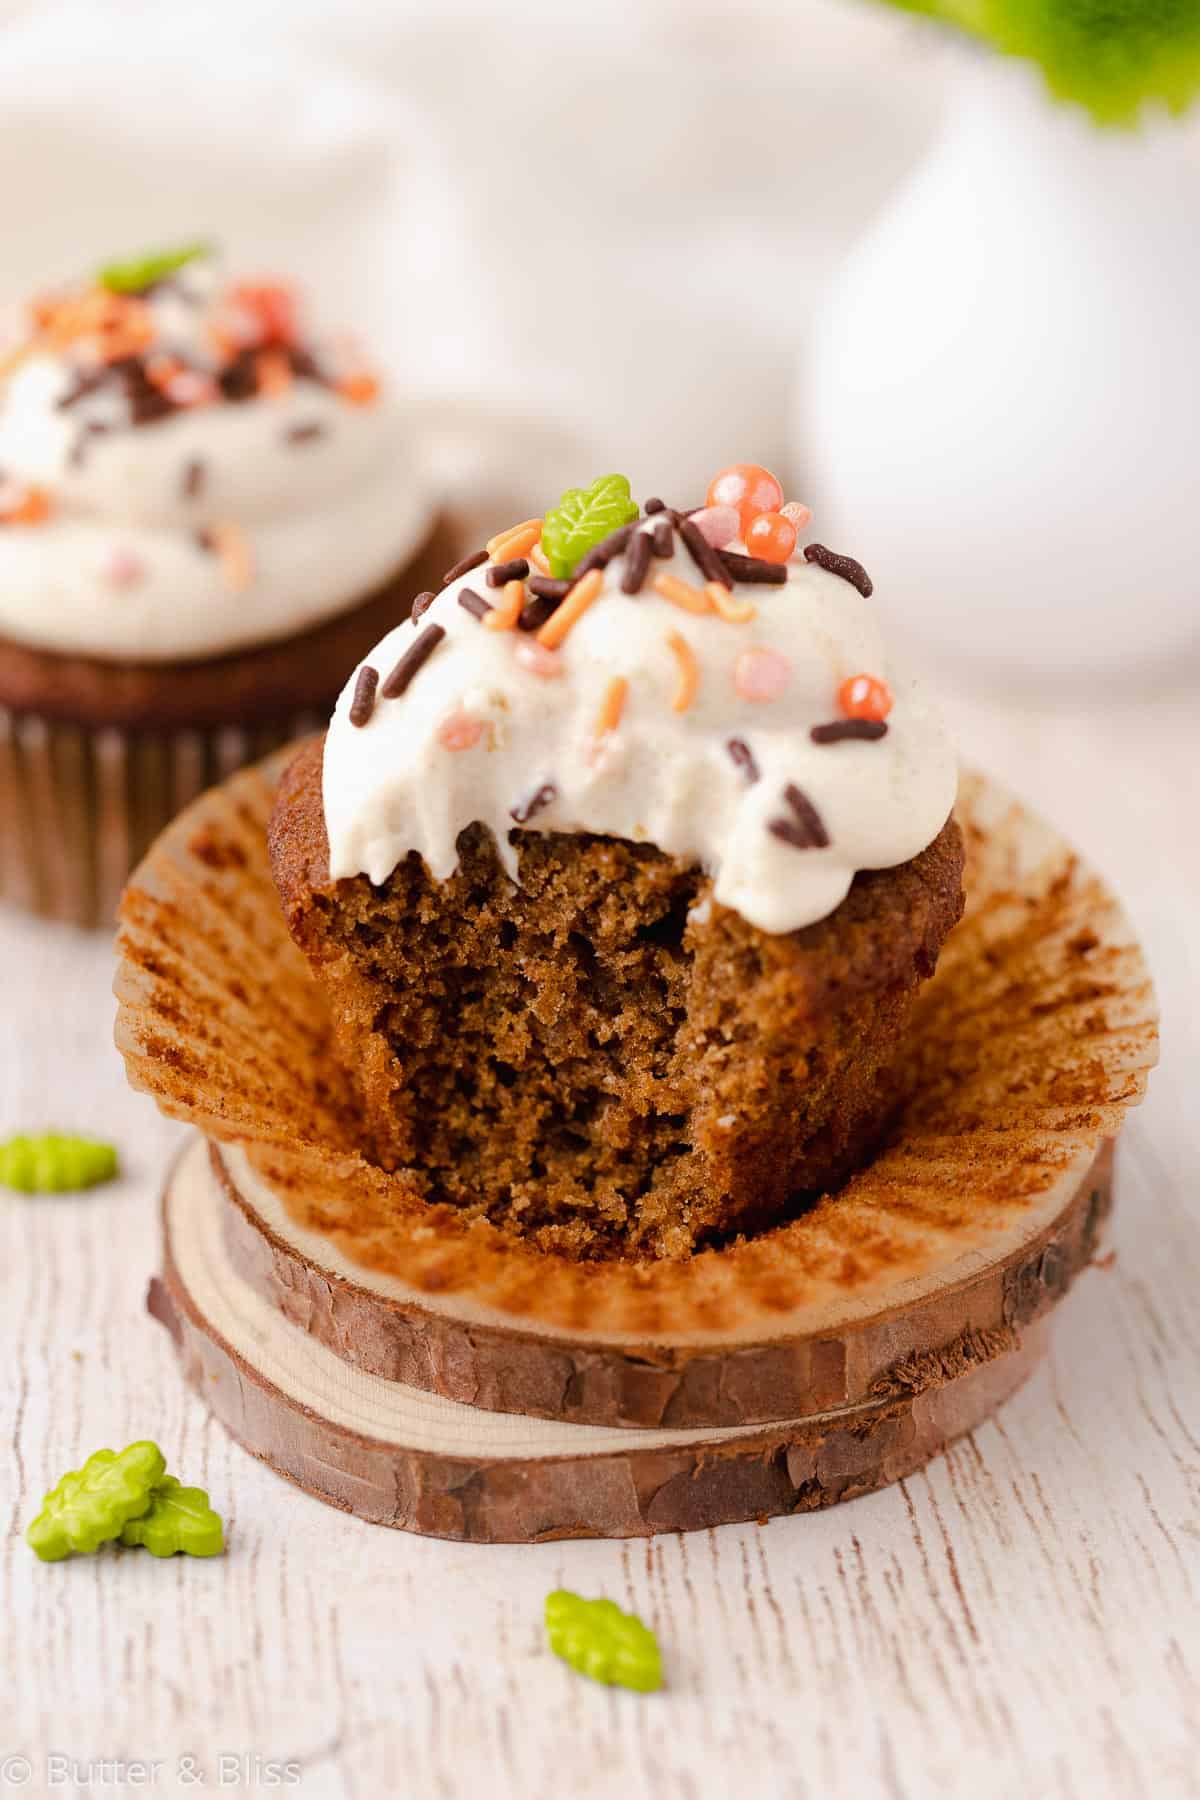 Spiced and frosted cupcake with a bite taken